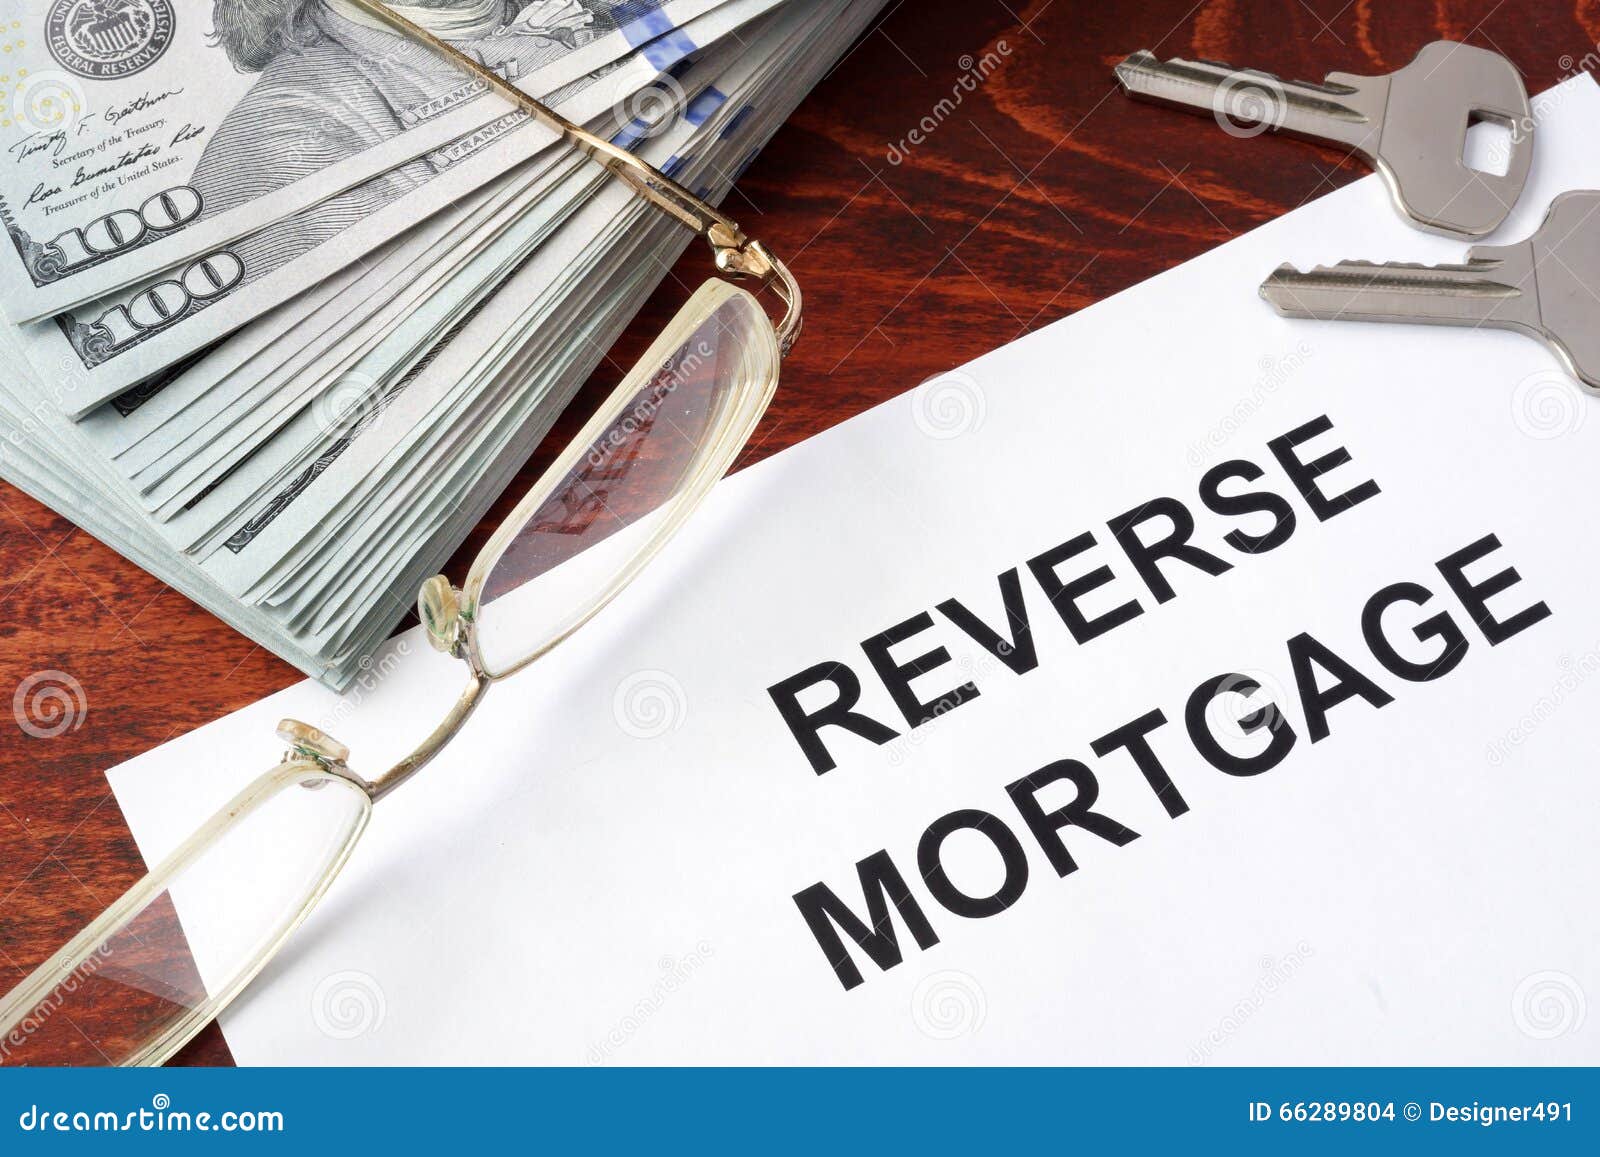 reverse mortgage form.